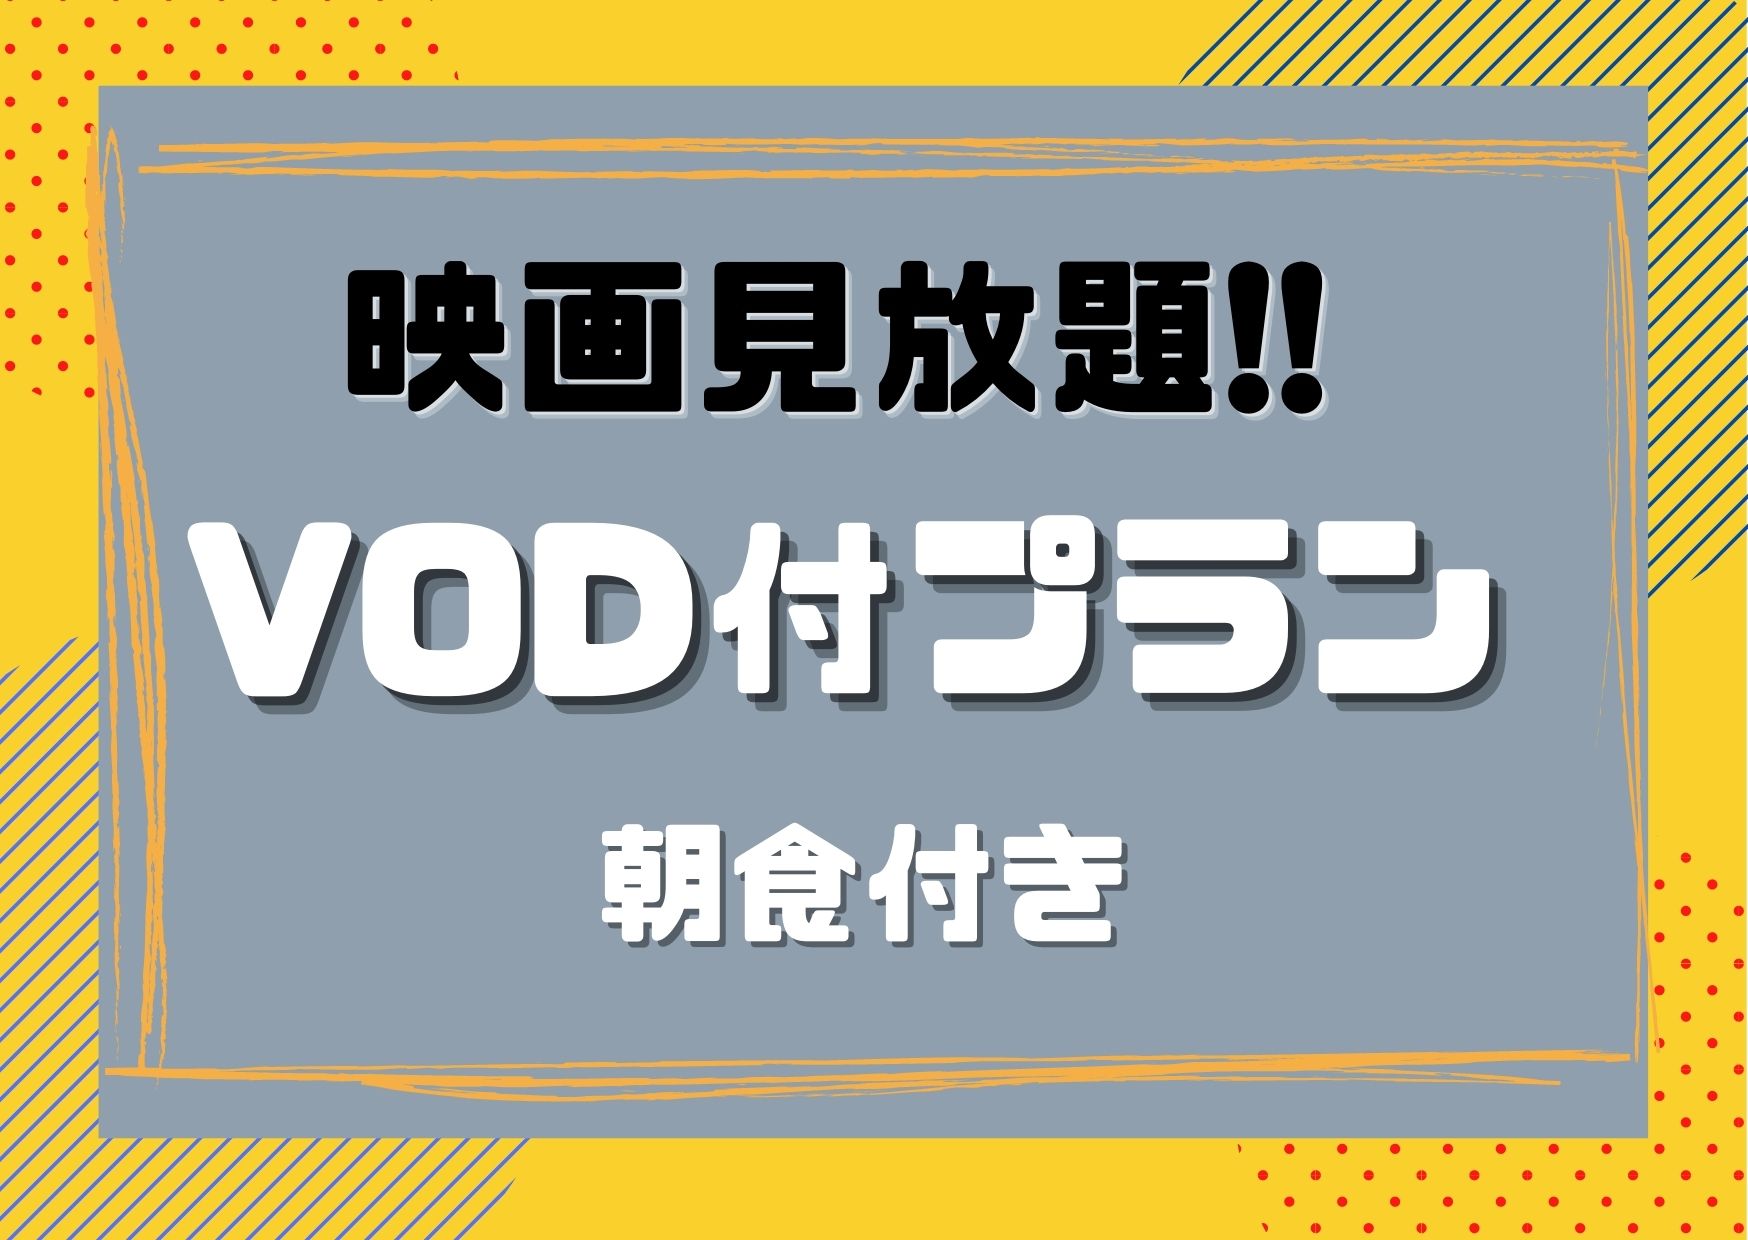 VODプラン（朝食付き）